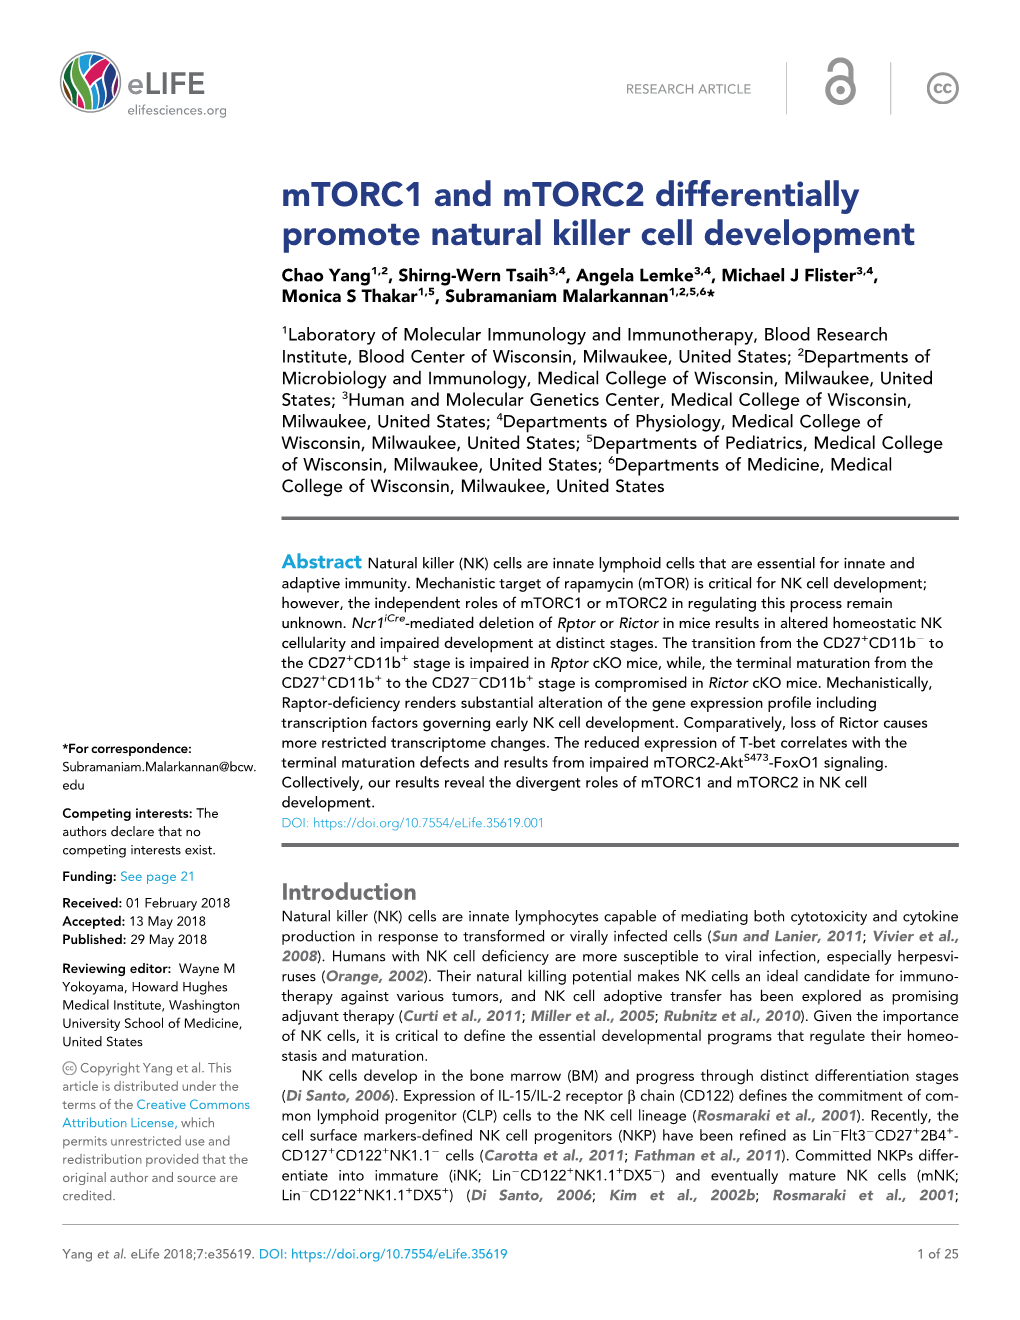 Mtorc1 and Mtorc2 Differentially Promote Natural Killer Cell